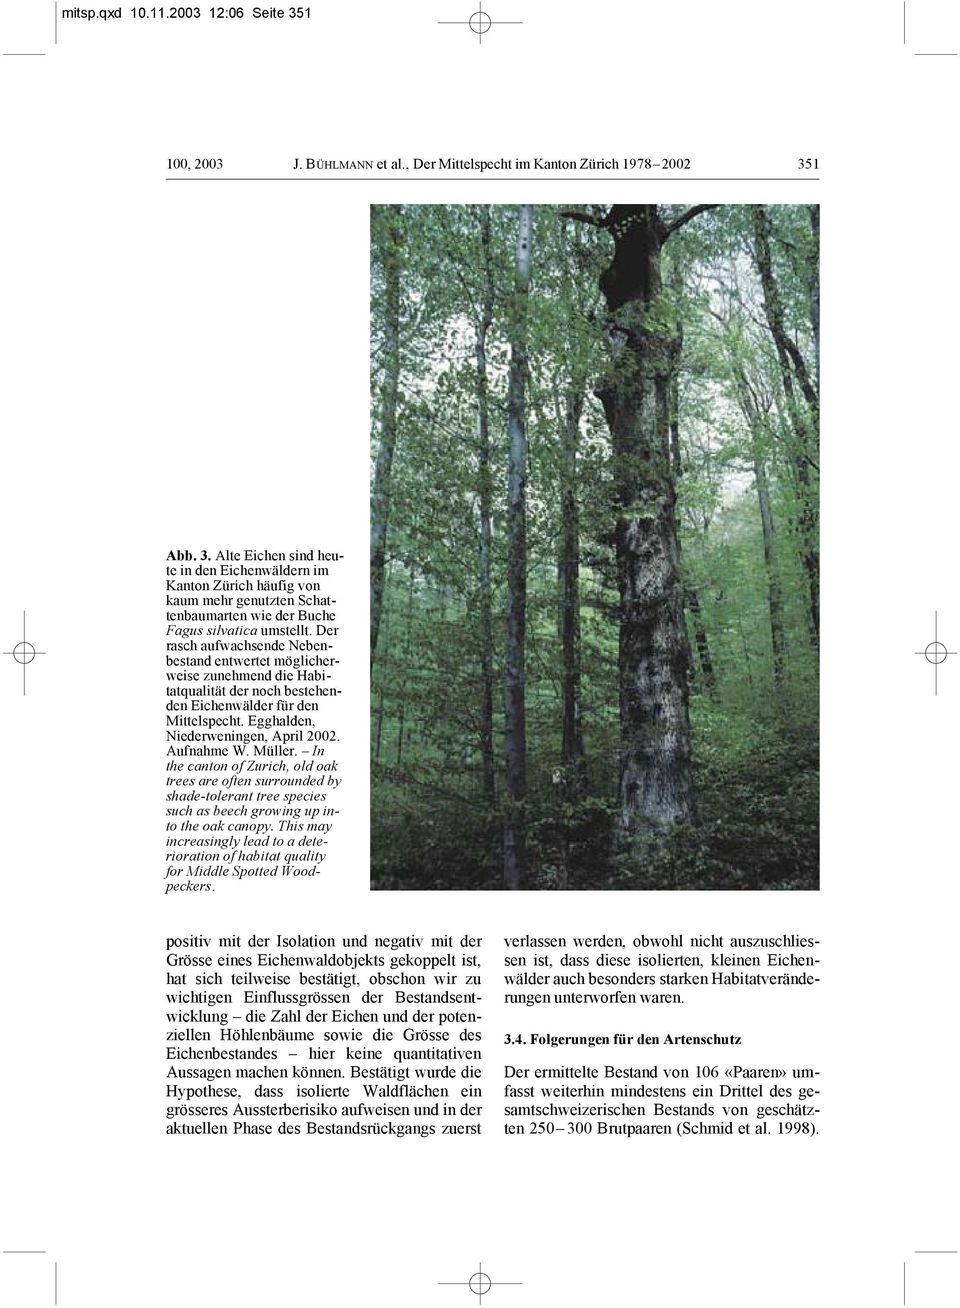 Müller. In the canton of Zurich, old oak trees are often surrounded by shade-tolerant tree species such as beech growing up into the oak canopy.